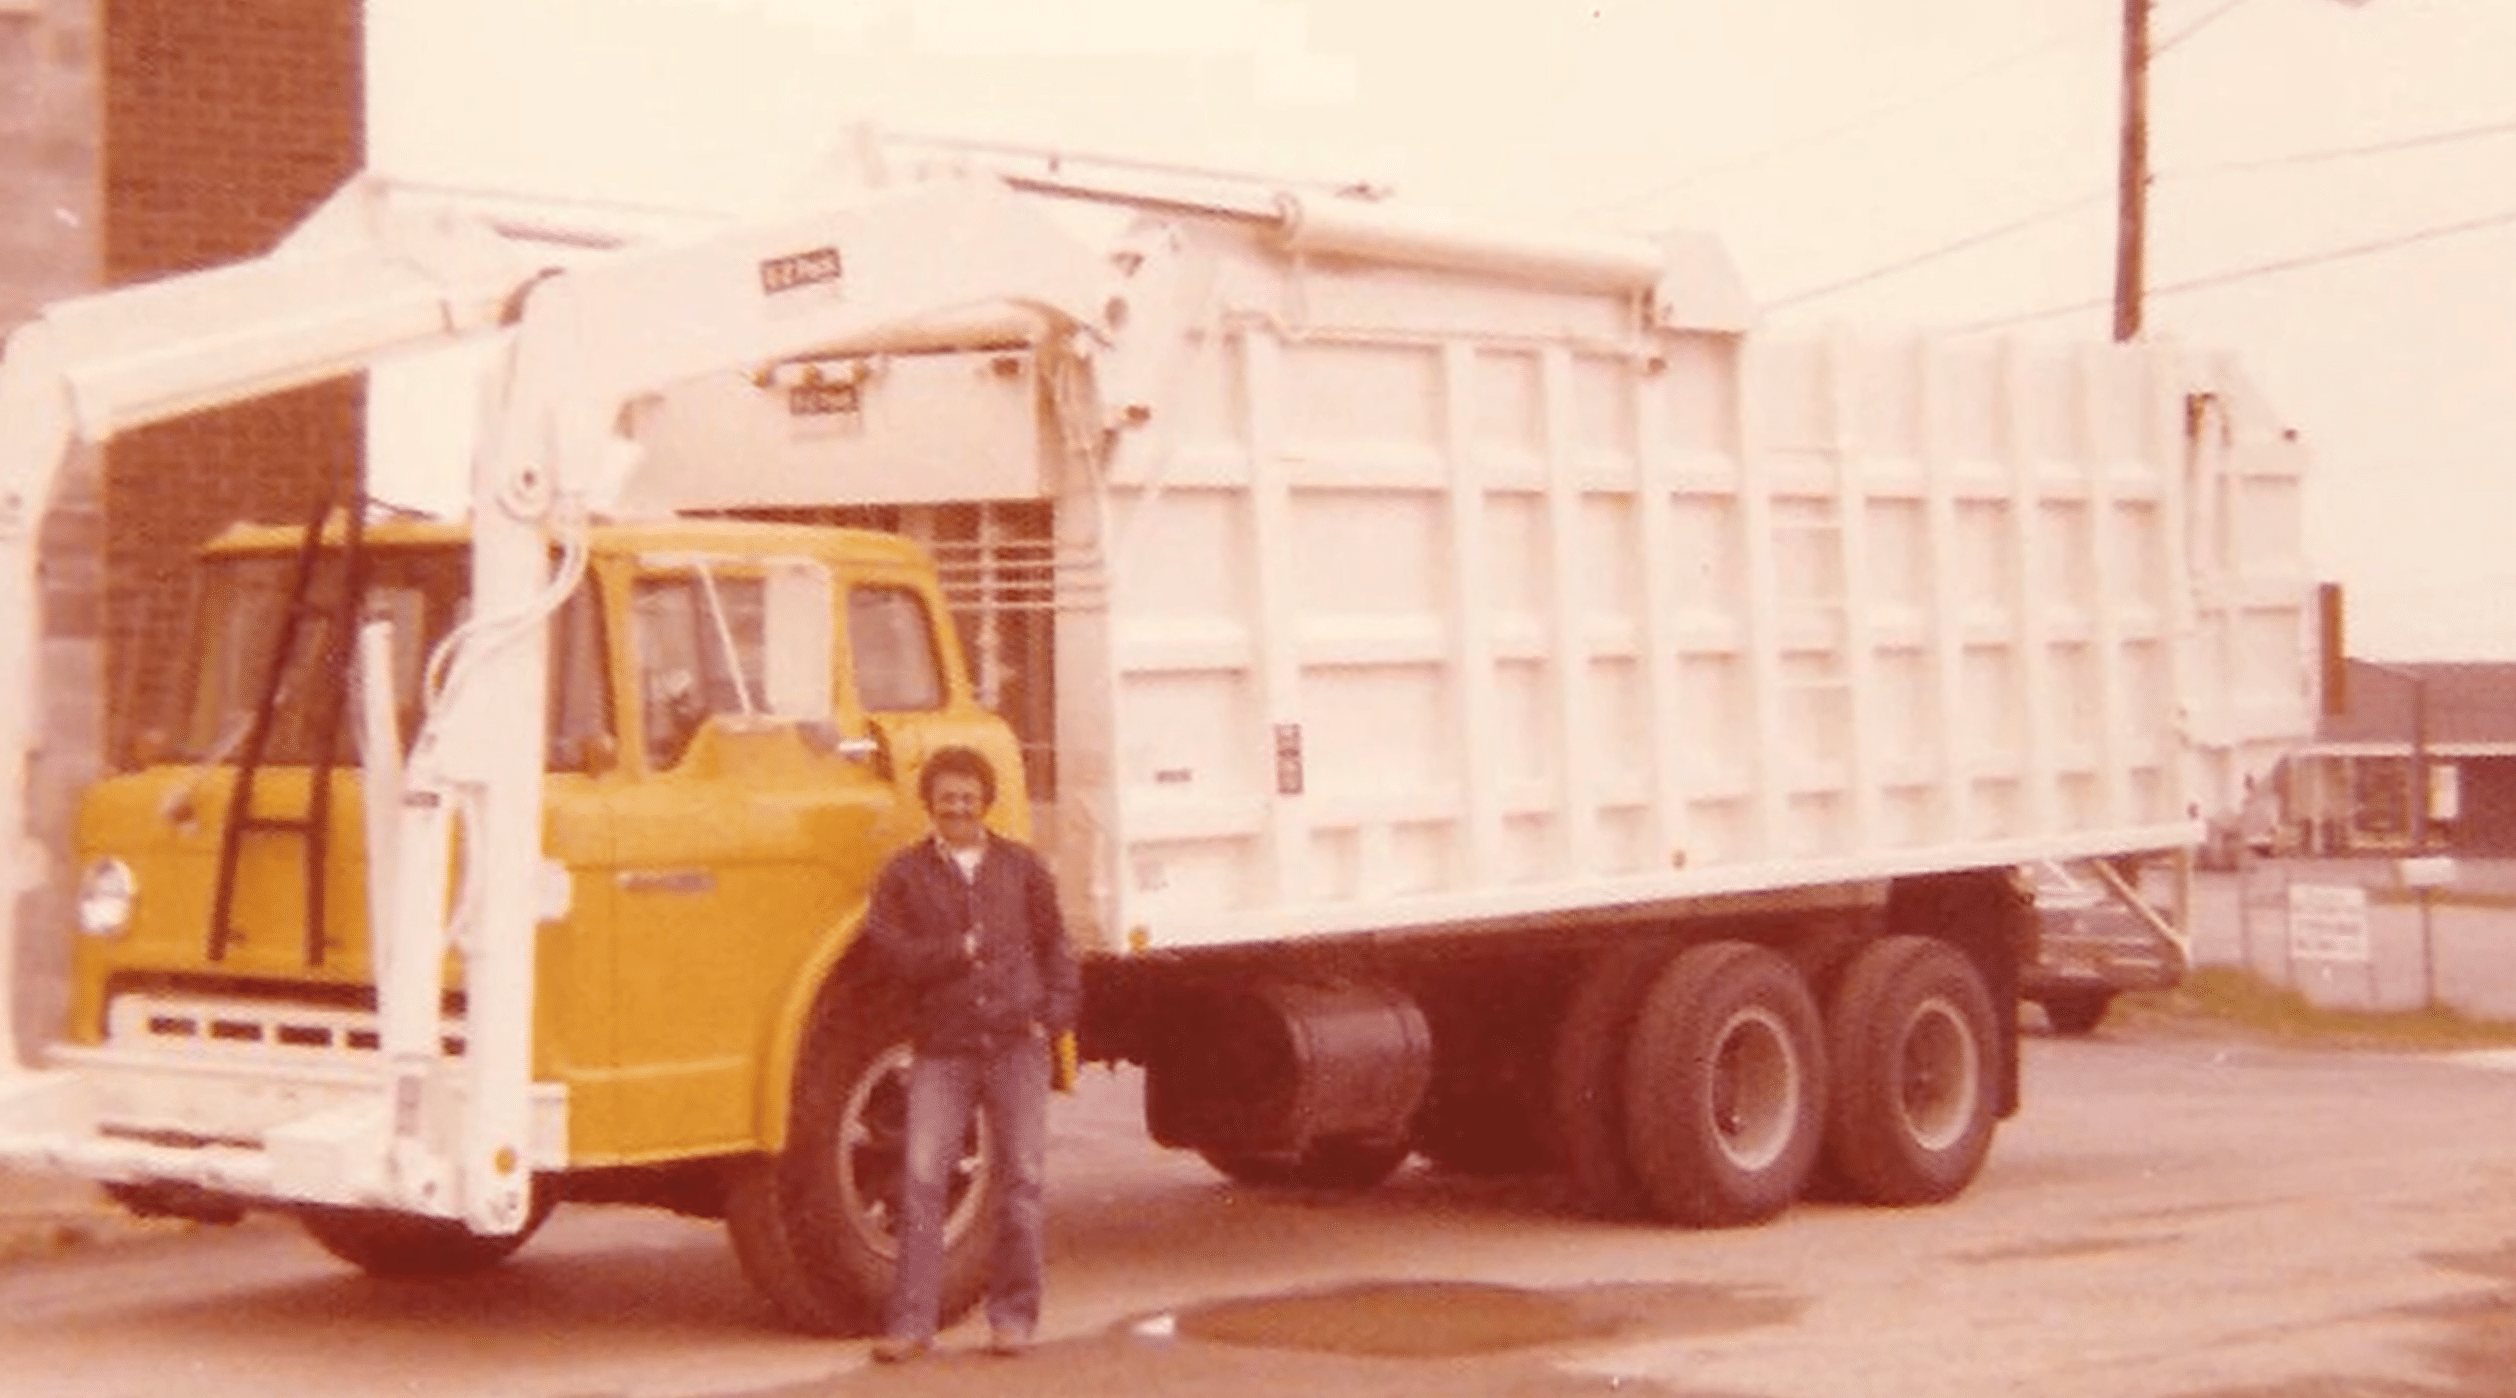 Old Garbage truck with a Rizzo standing infront of it.